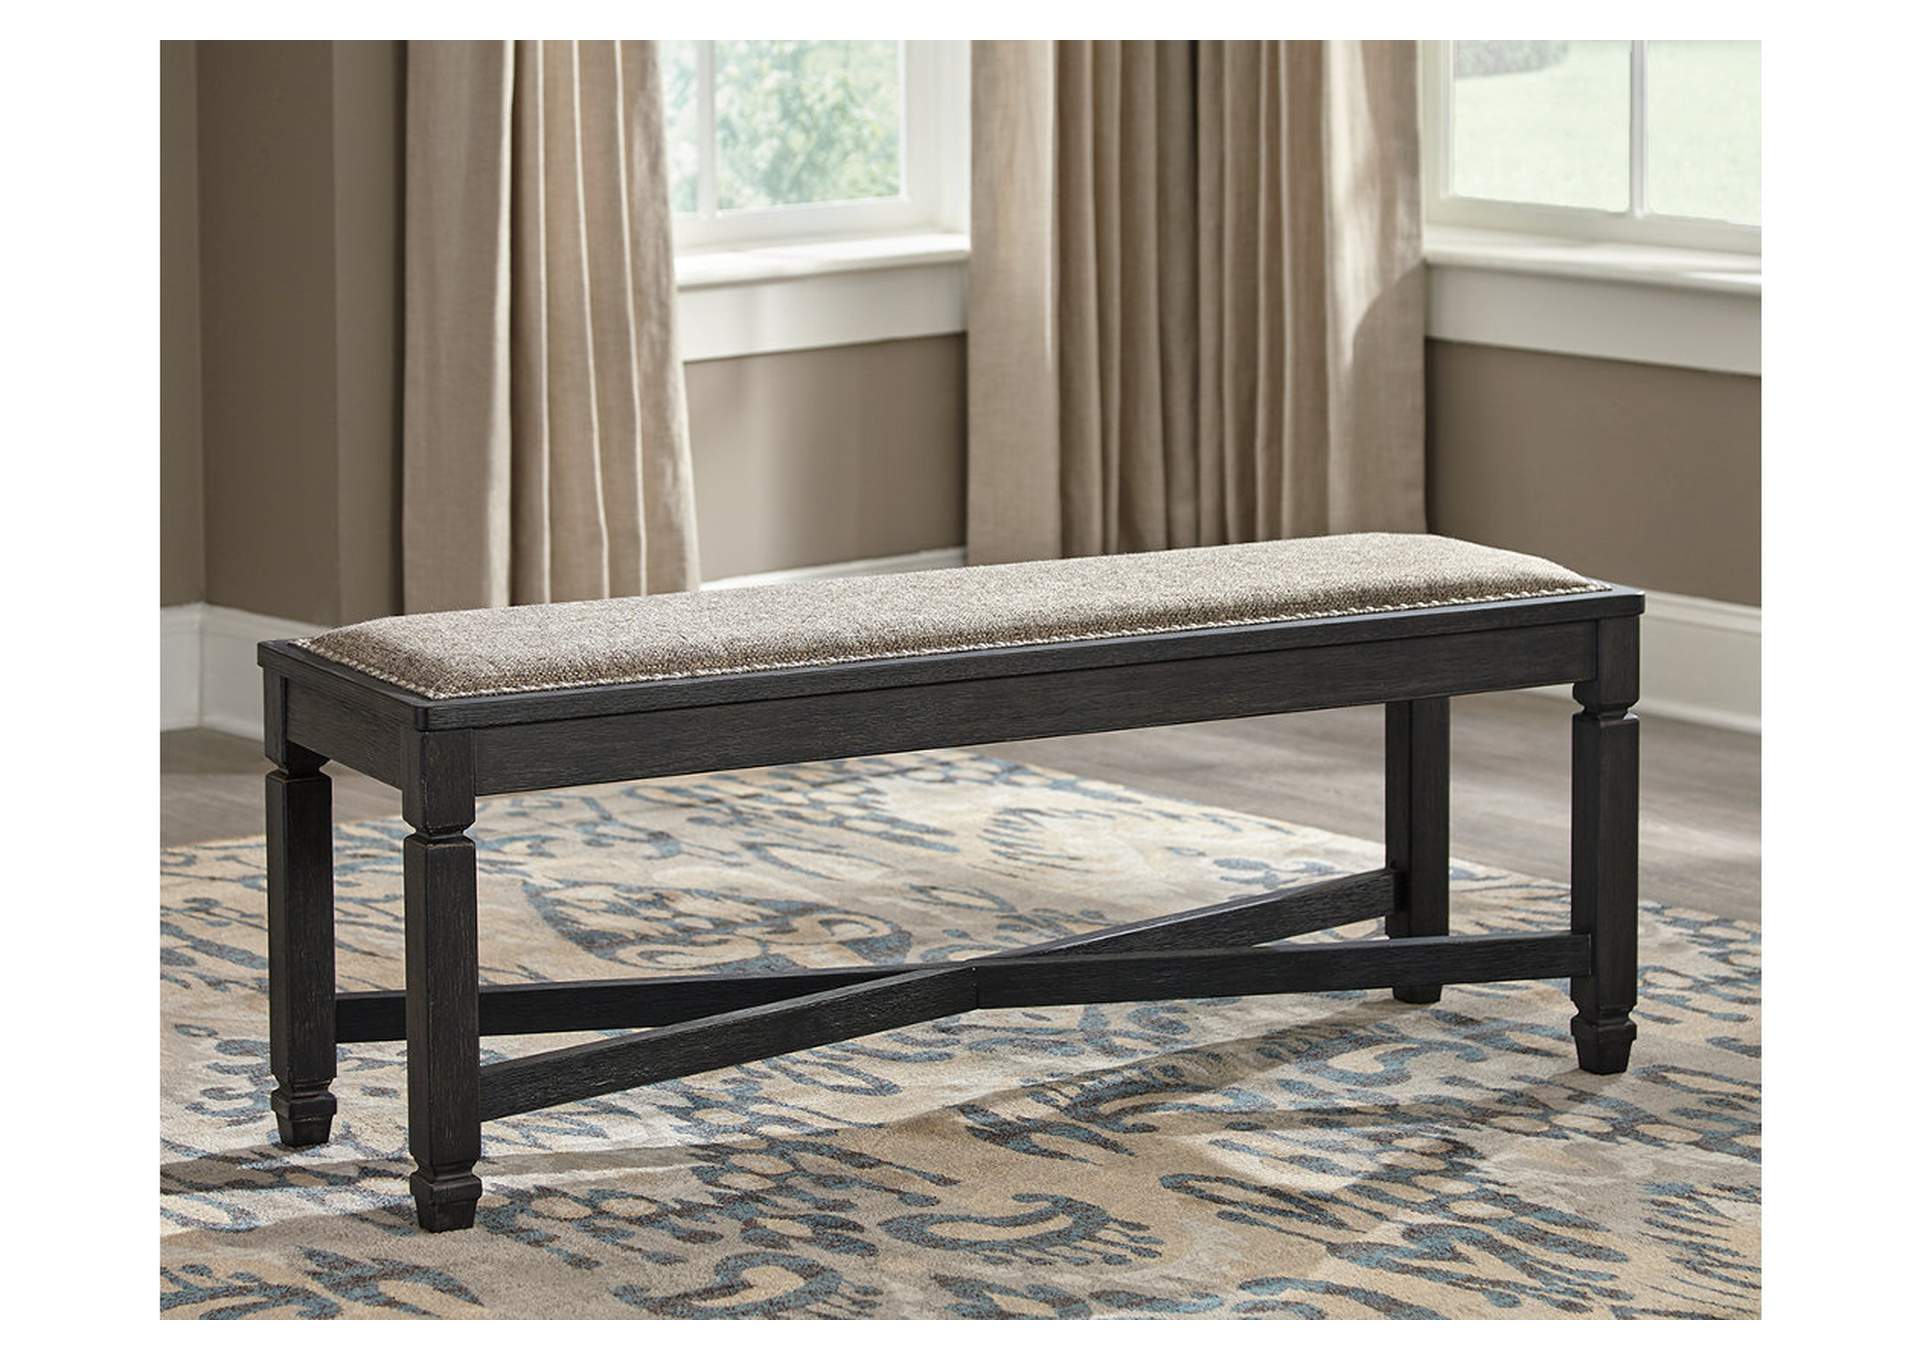 Tyler Creek Dining Room Bench,Direct To Consumer Express